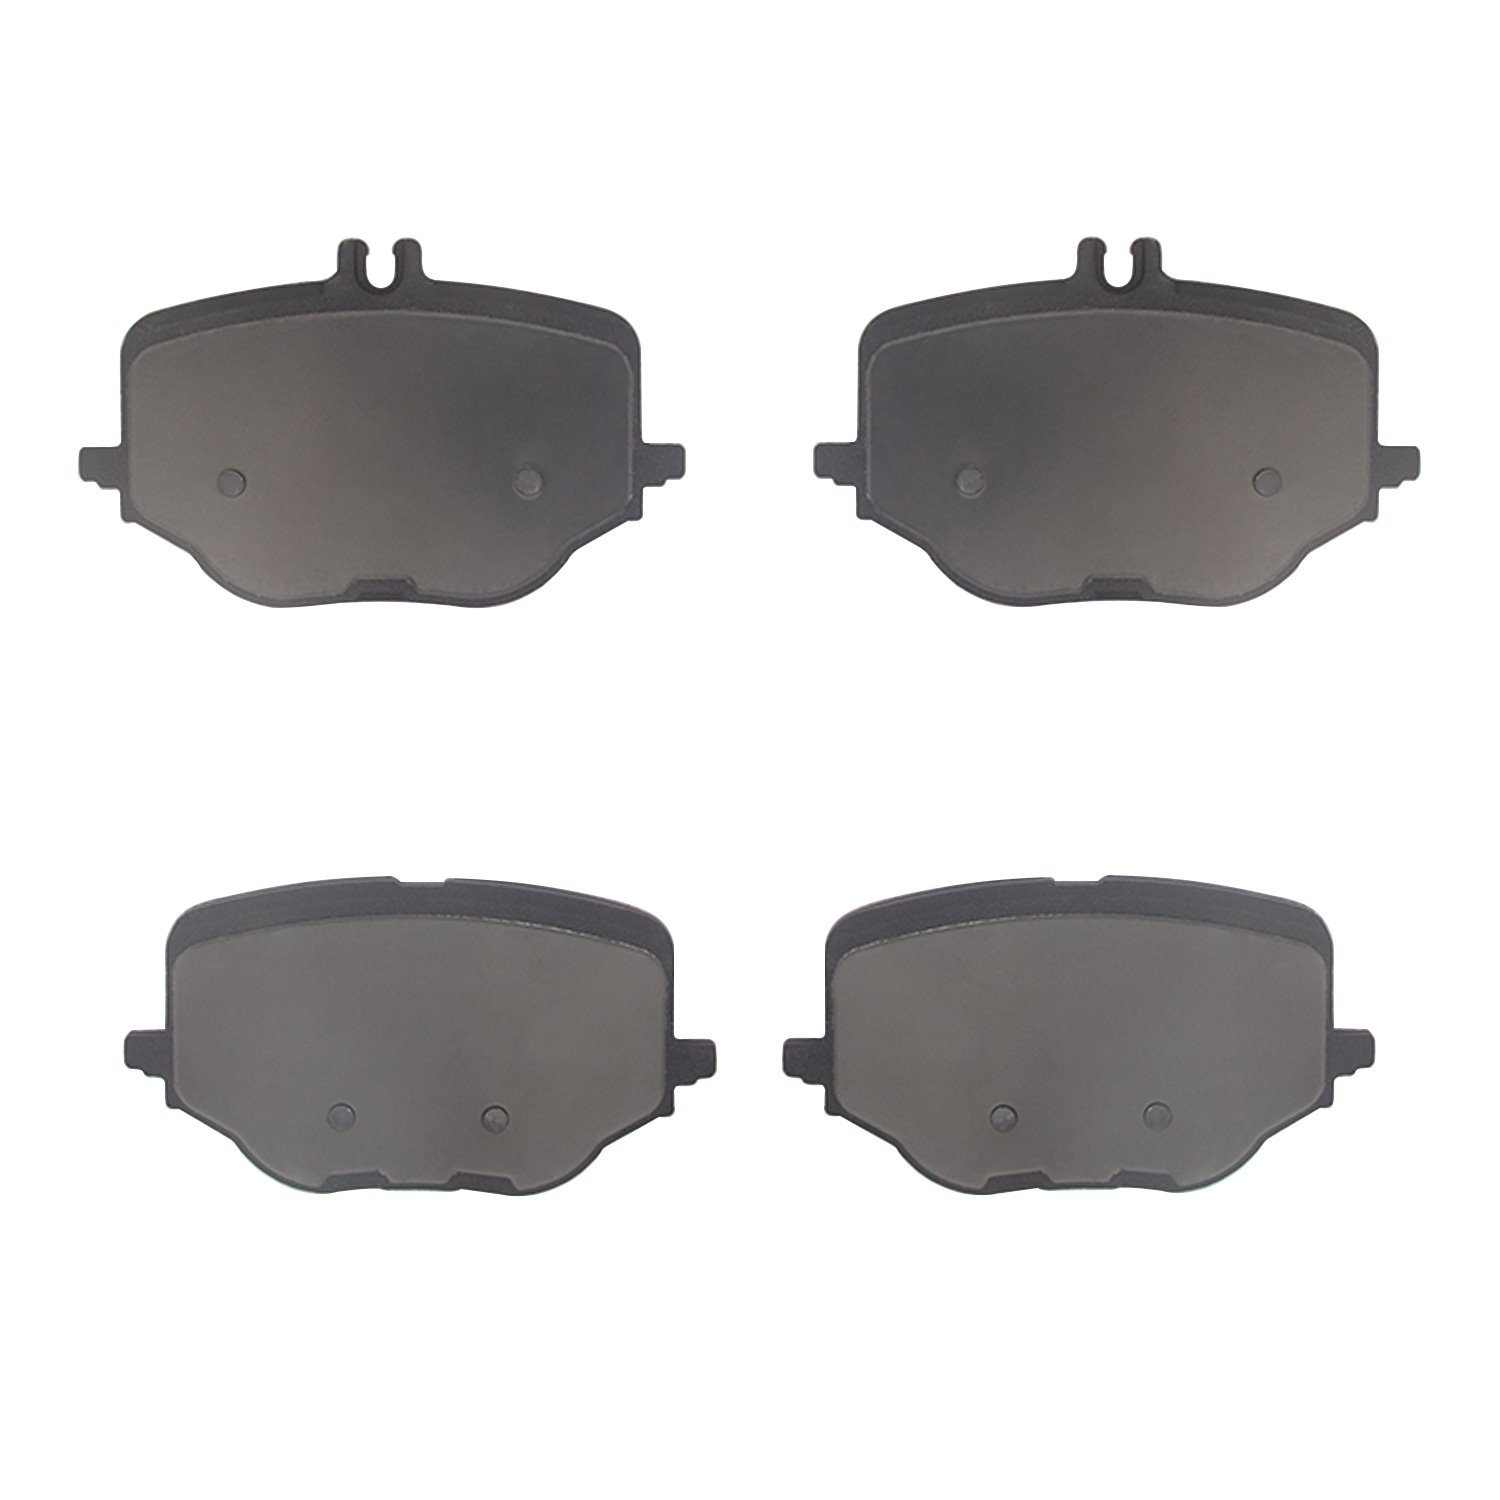 1600-2425-00 5000 Euro Ceramic Brake Pads, Fits Select Mercedes-Benz, Position: Rear